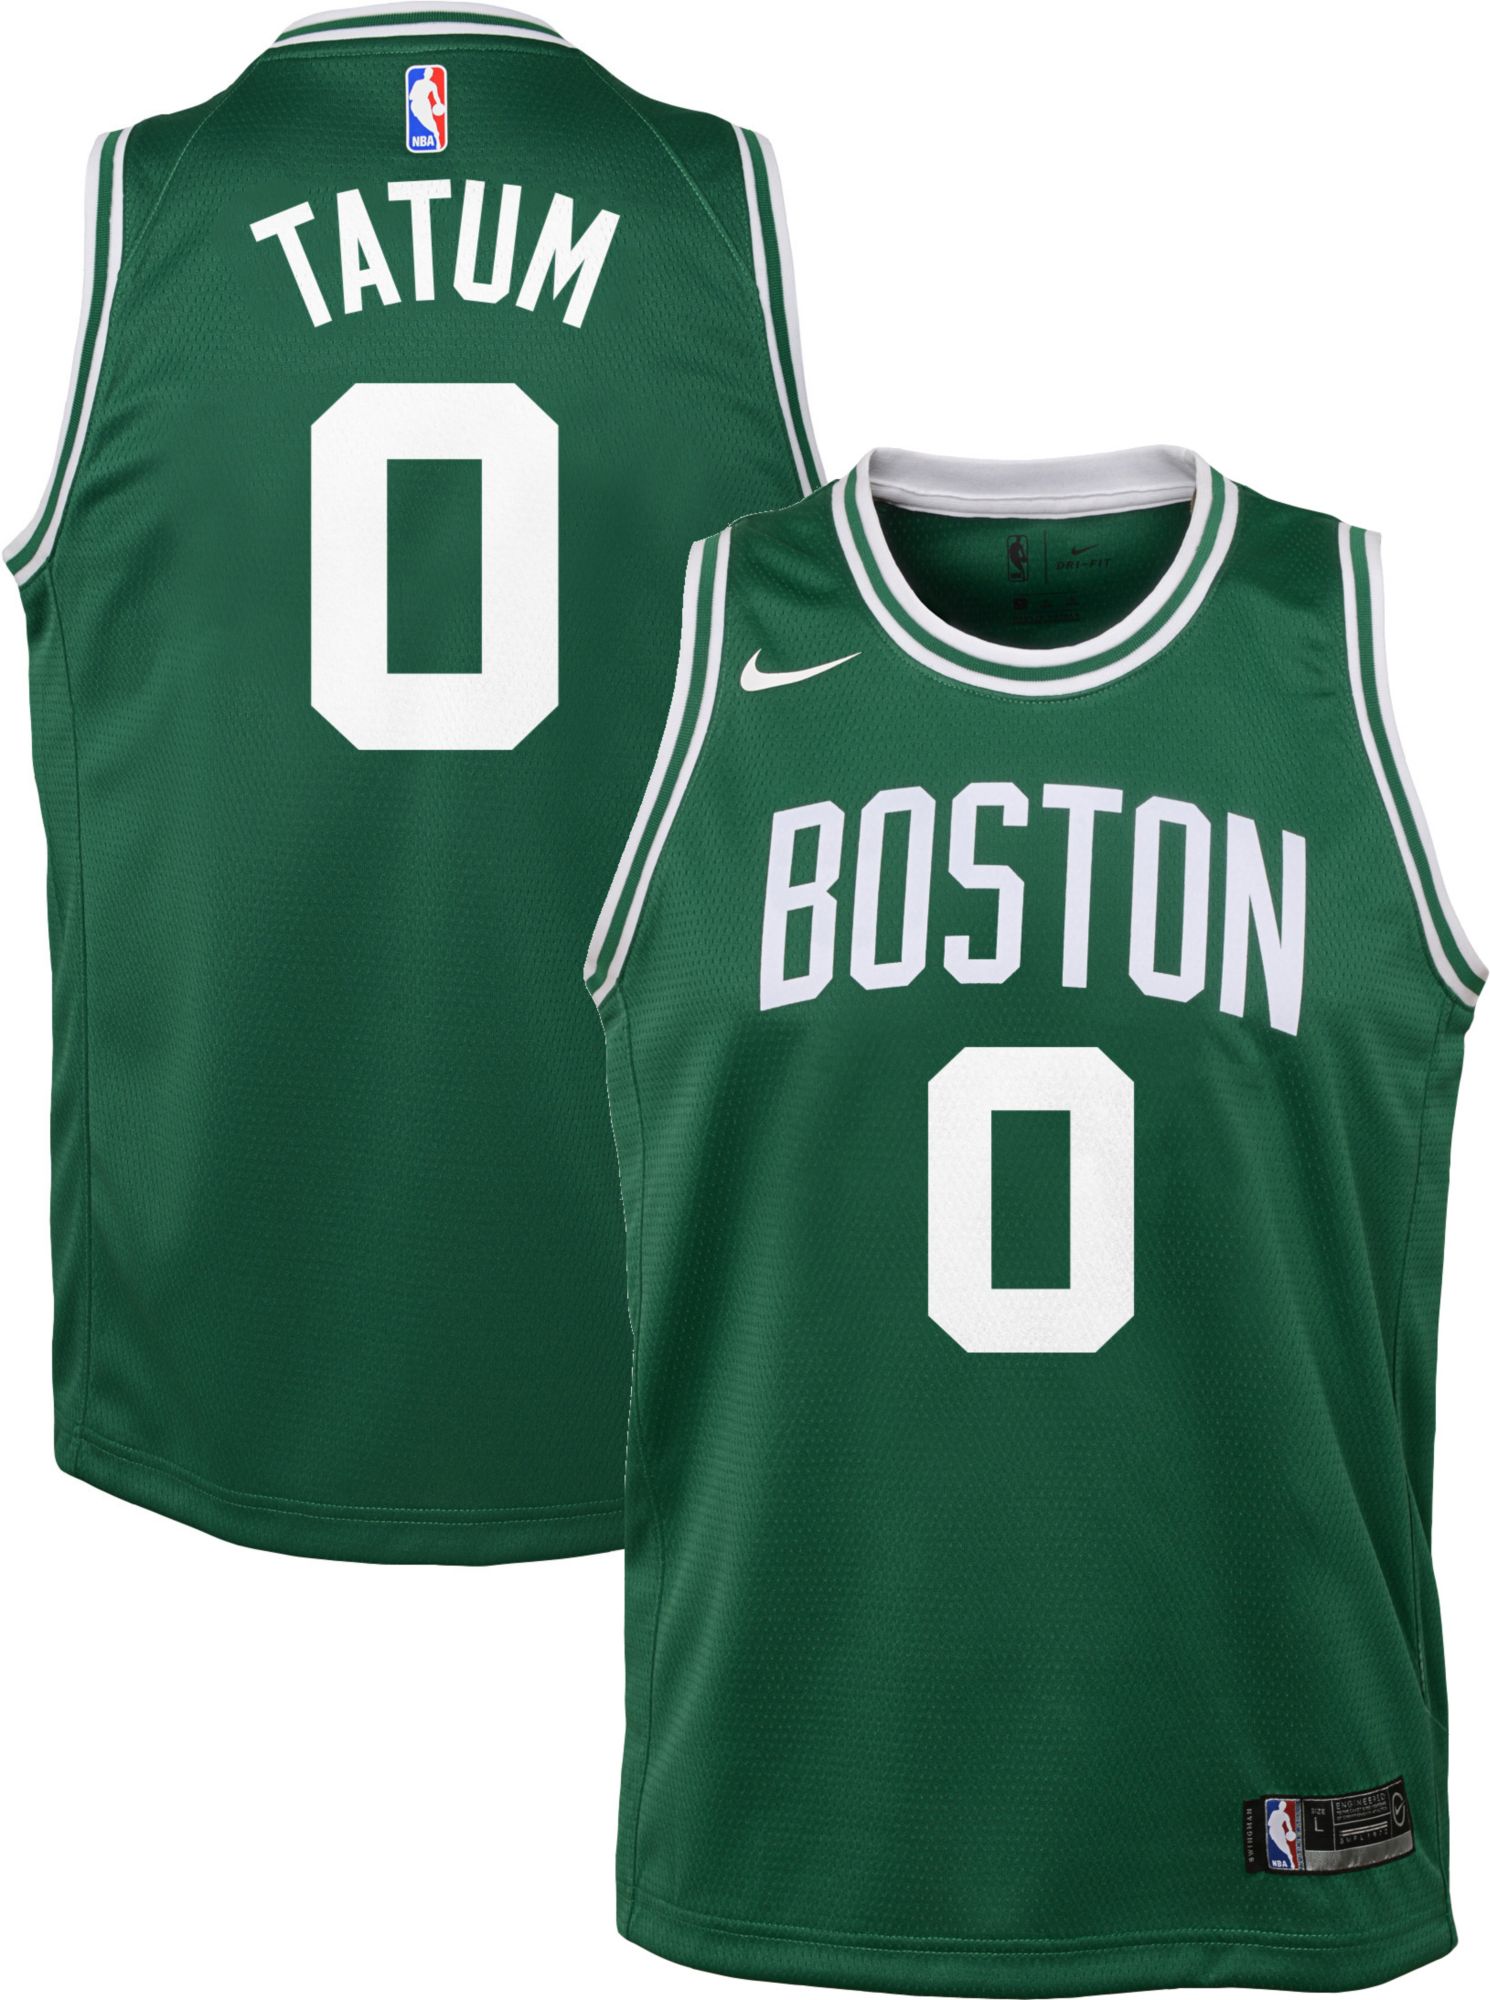 marcus smart youth jersey